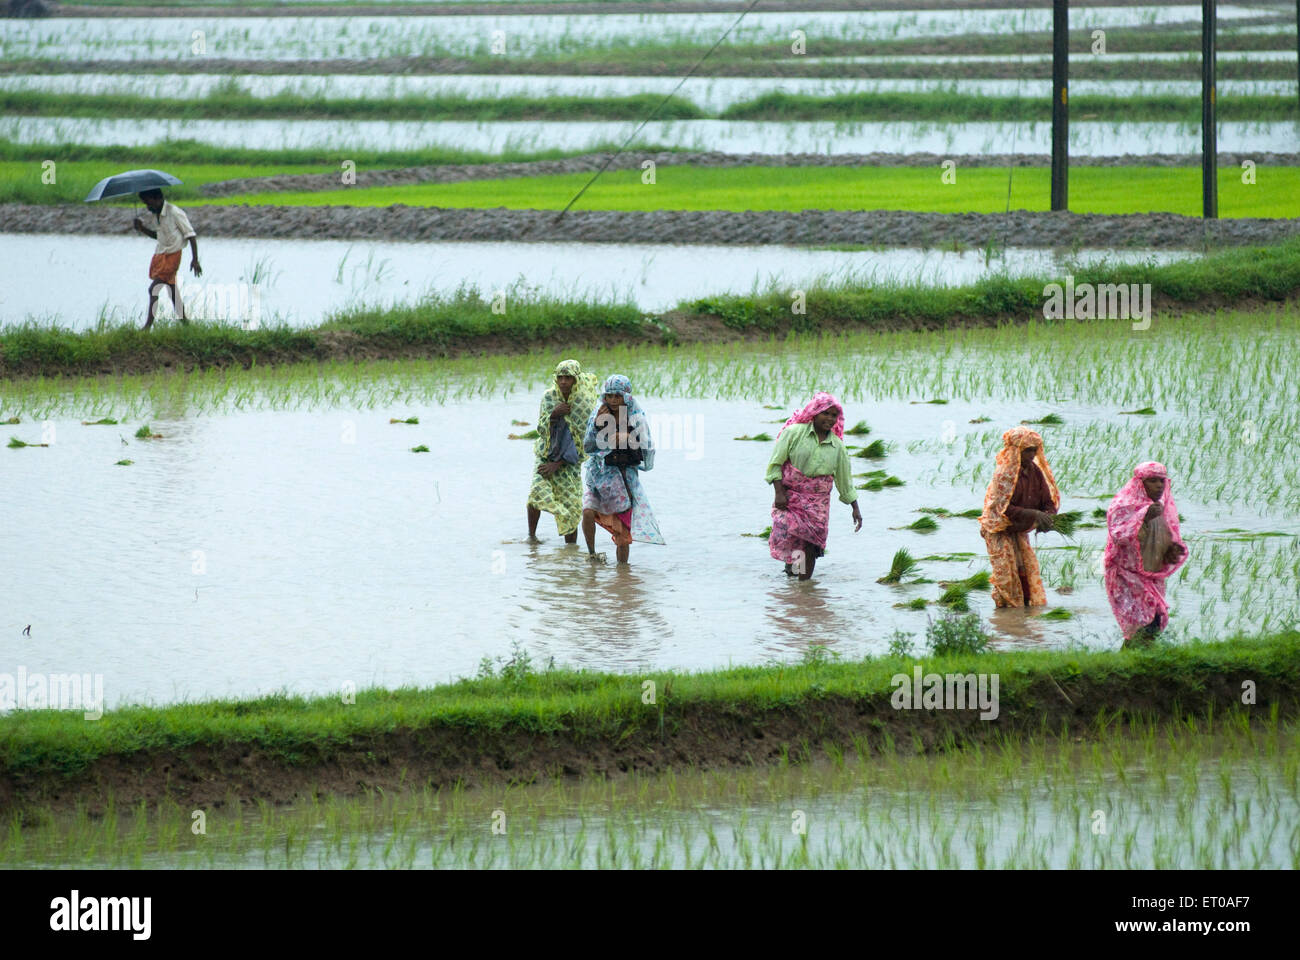 sowing paddy in rice field during monsoon near Palakkad Kerala India Indian women working Stock Photo